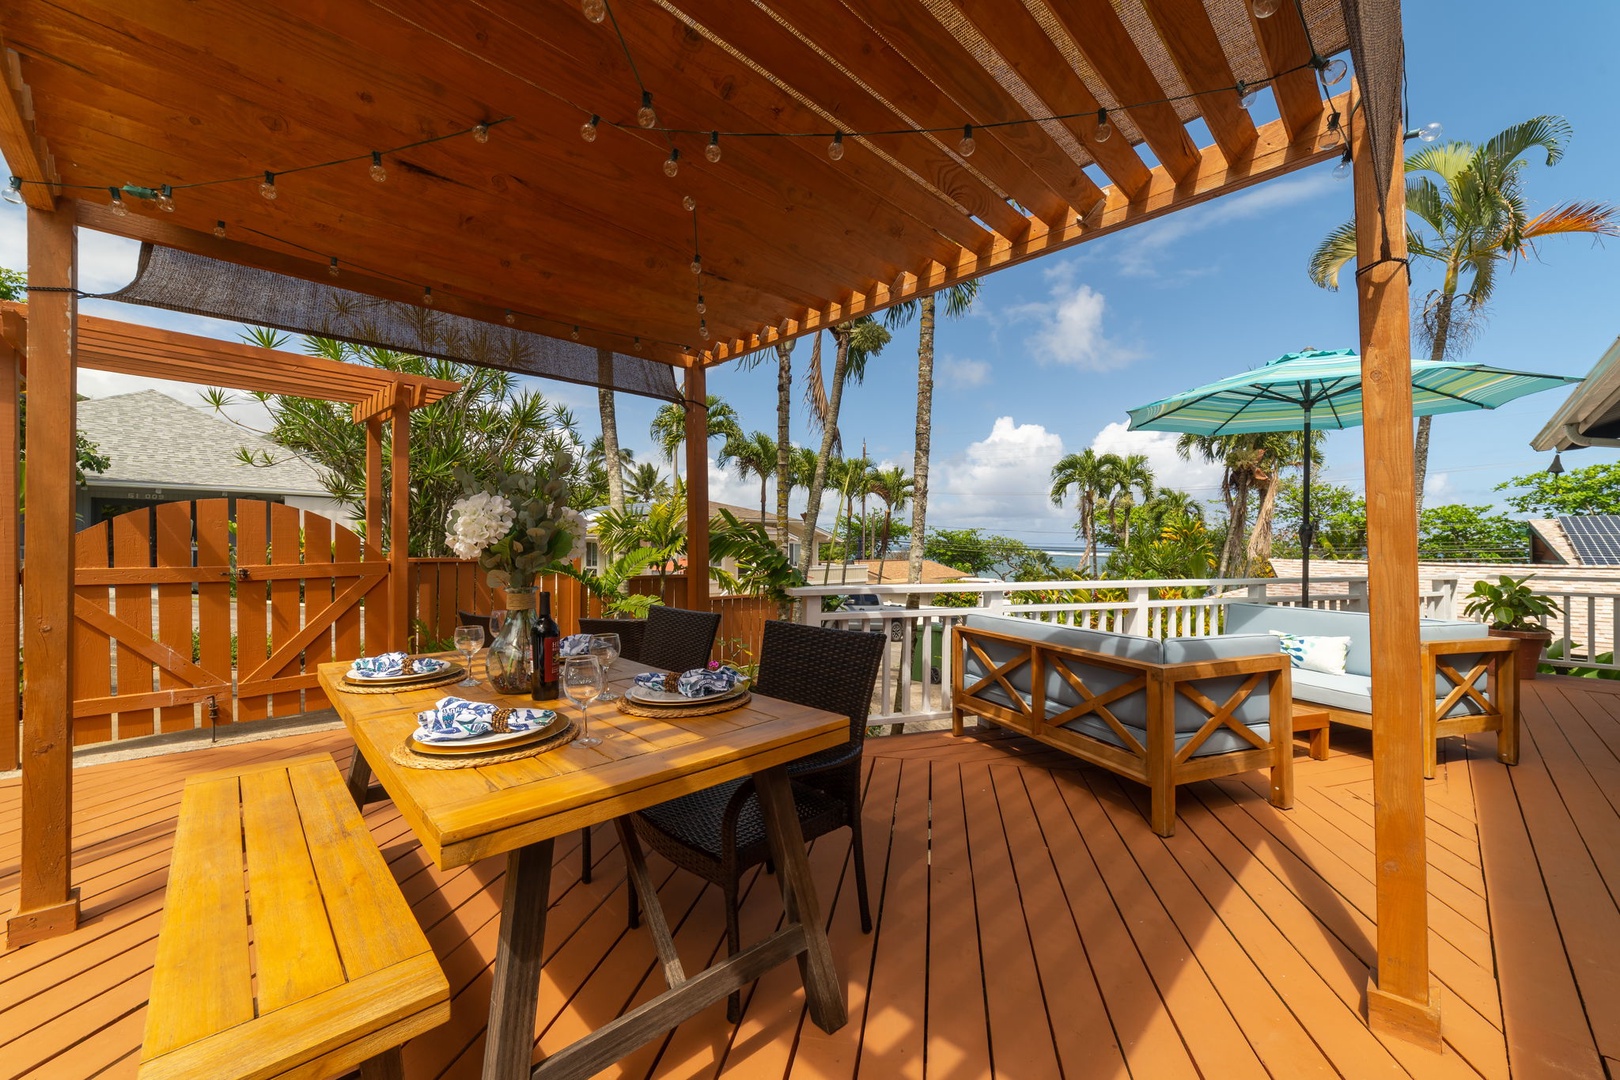 Kaaawa Vacation Rentals, Pali Kai - Outdoor Lanai with Dining Table and Outdoor Sofas to enjoy sunsets, whale watching or soaking in the sun.